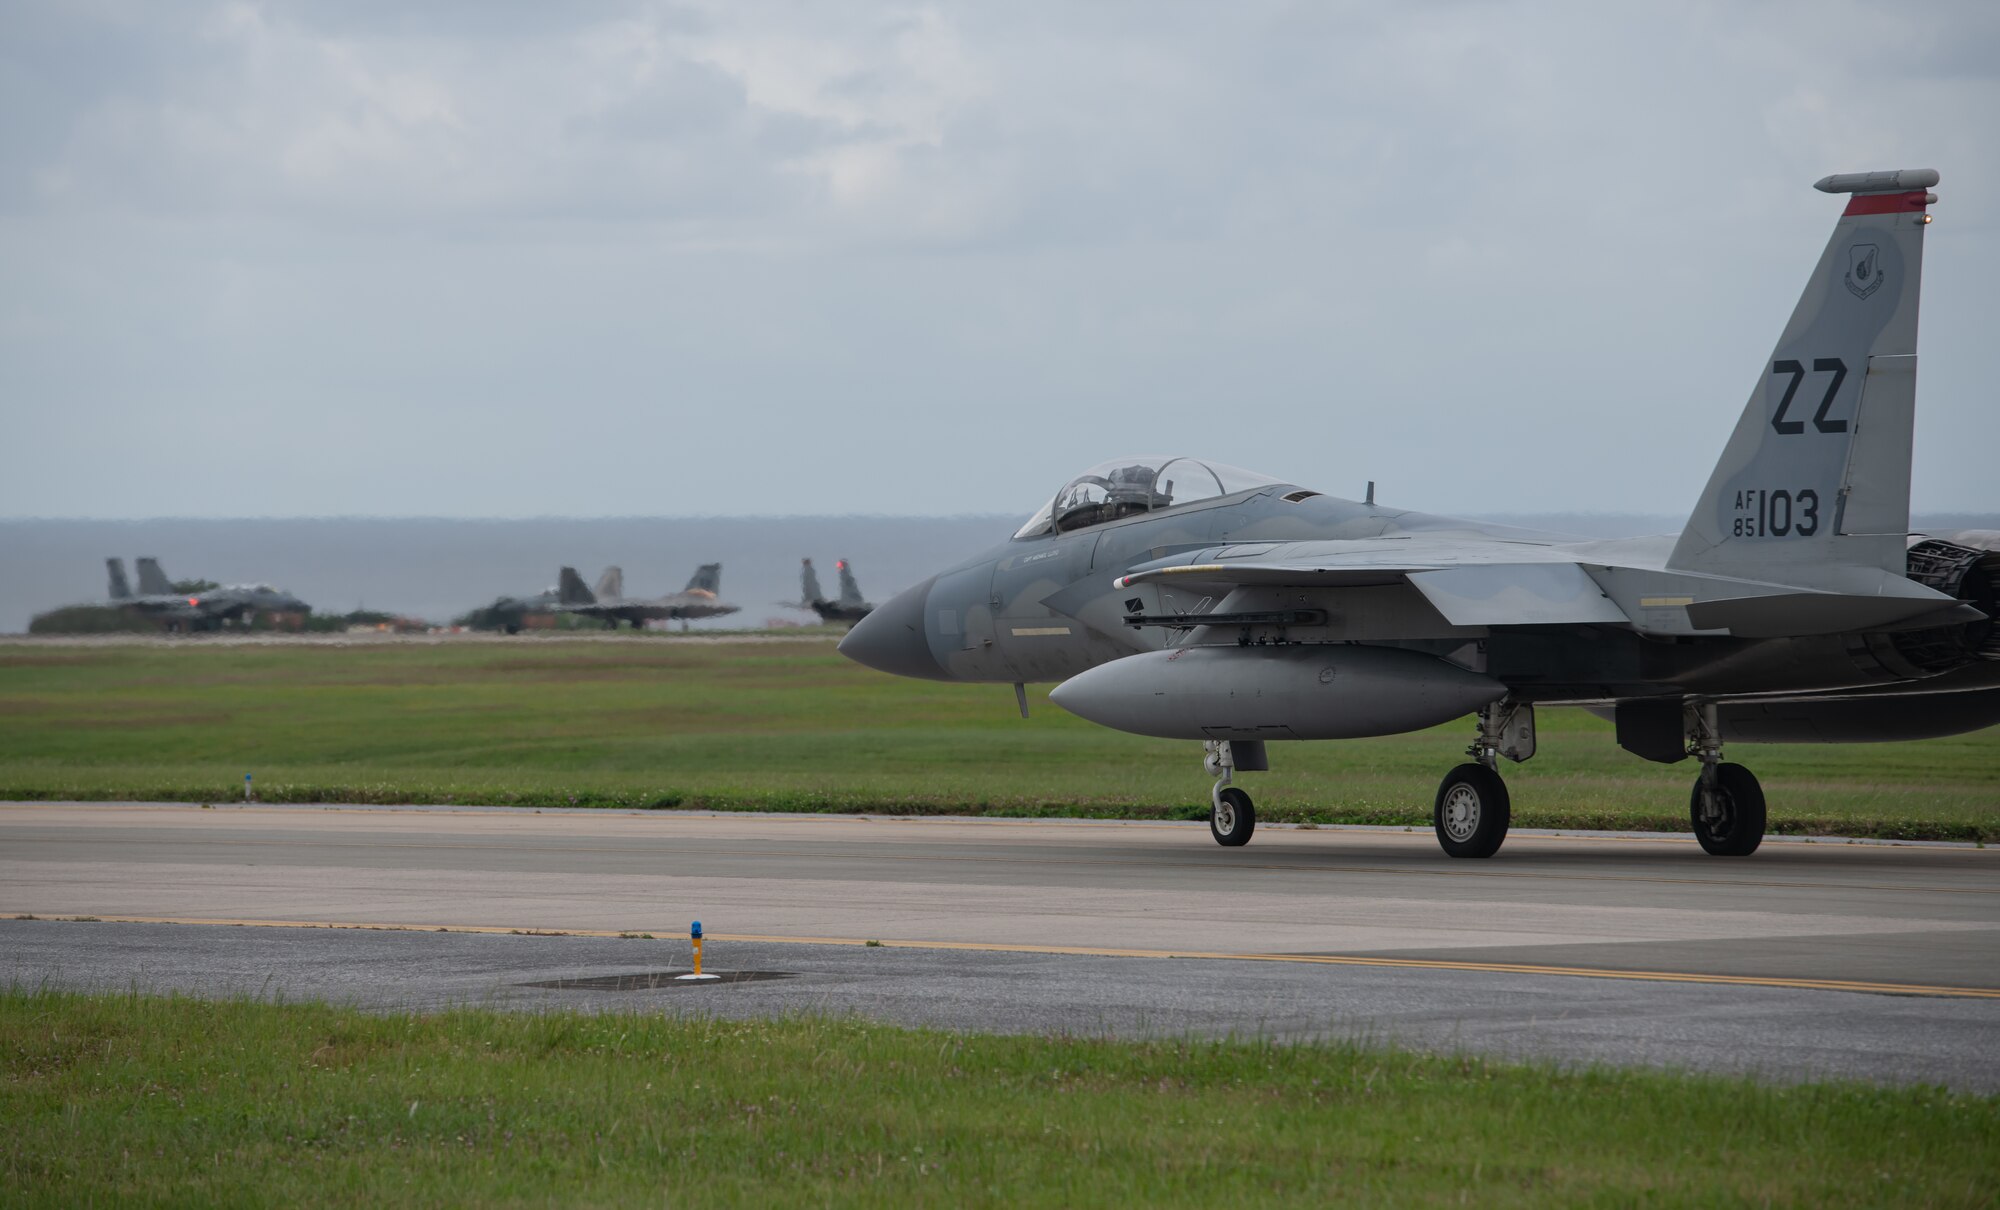 An F-15 Eagle taxis along the runway. In the background there are a mix of F-15s and F-22 Raptors.